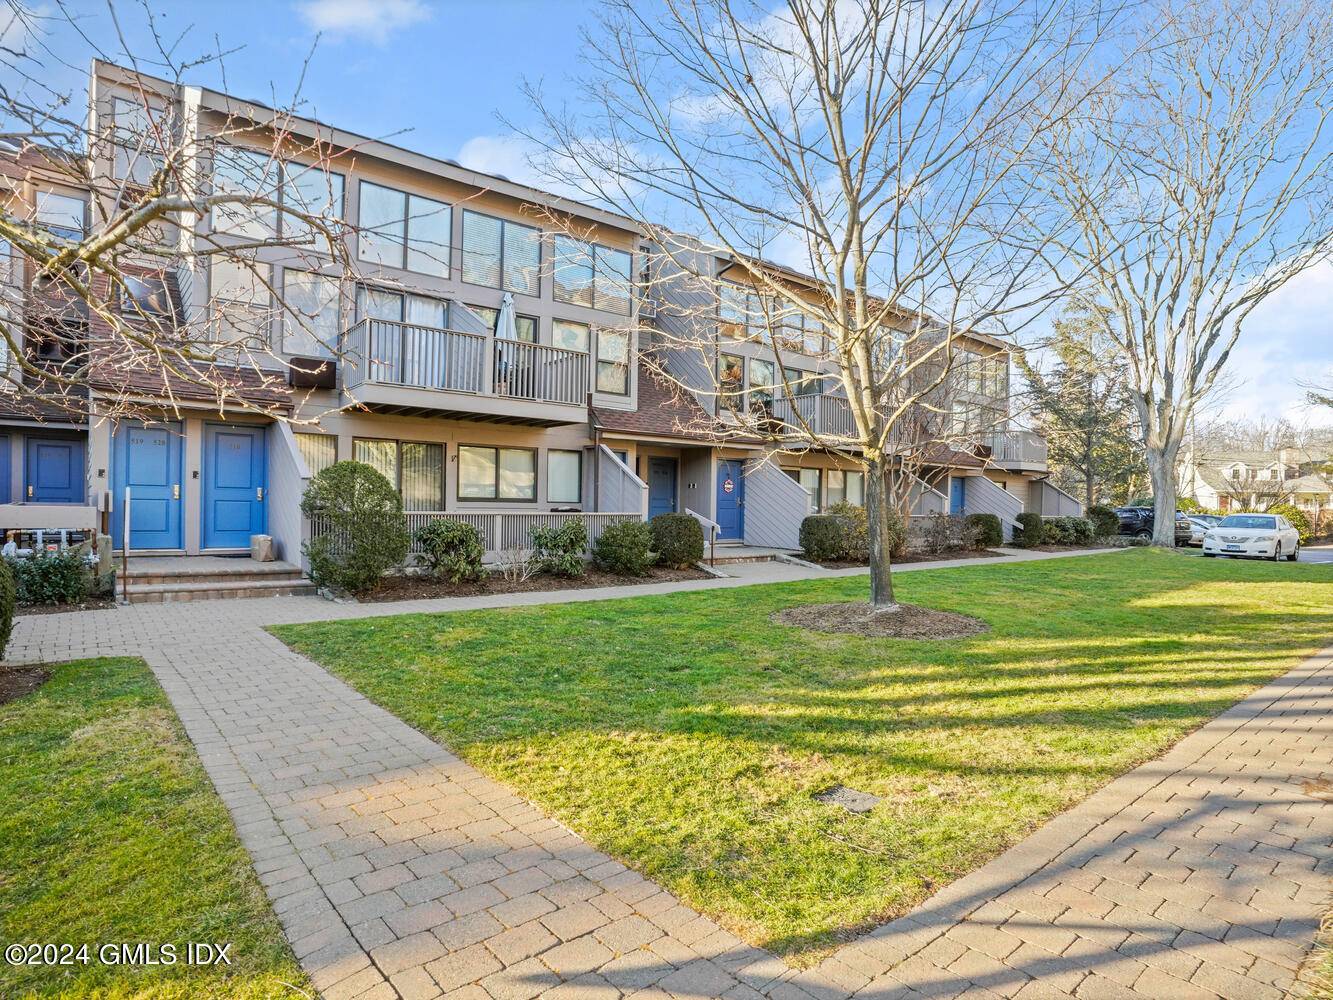 Enjoy this well kept, sun filled two bedroom Old Greenwich condo in The Common !